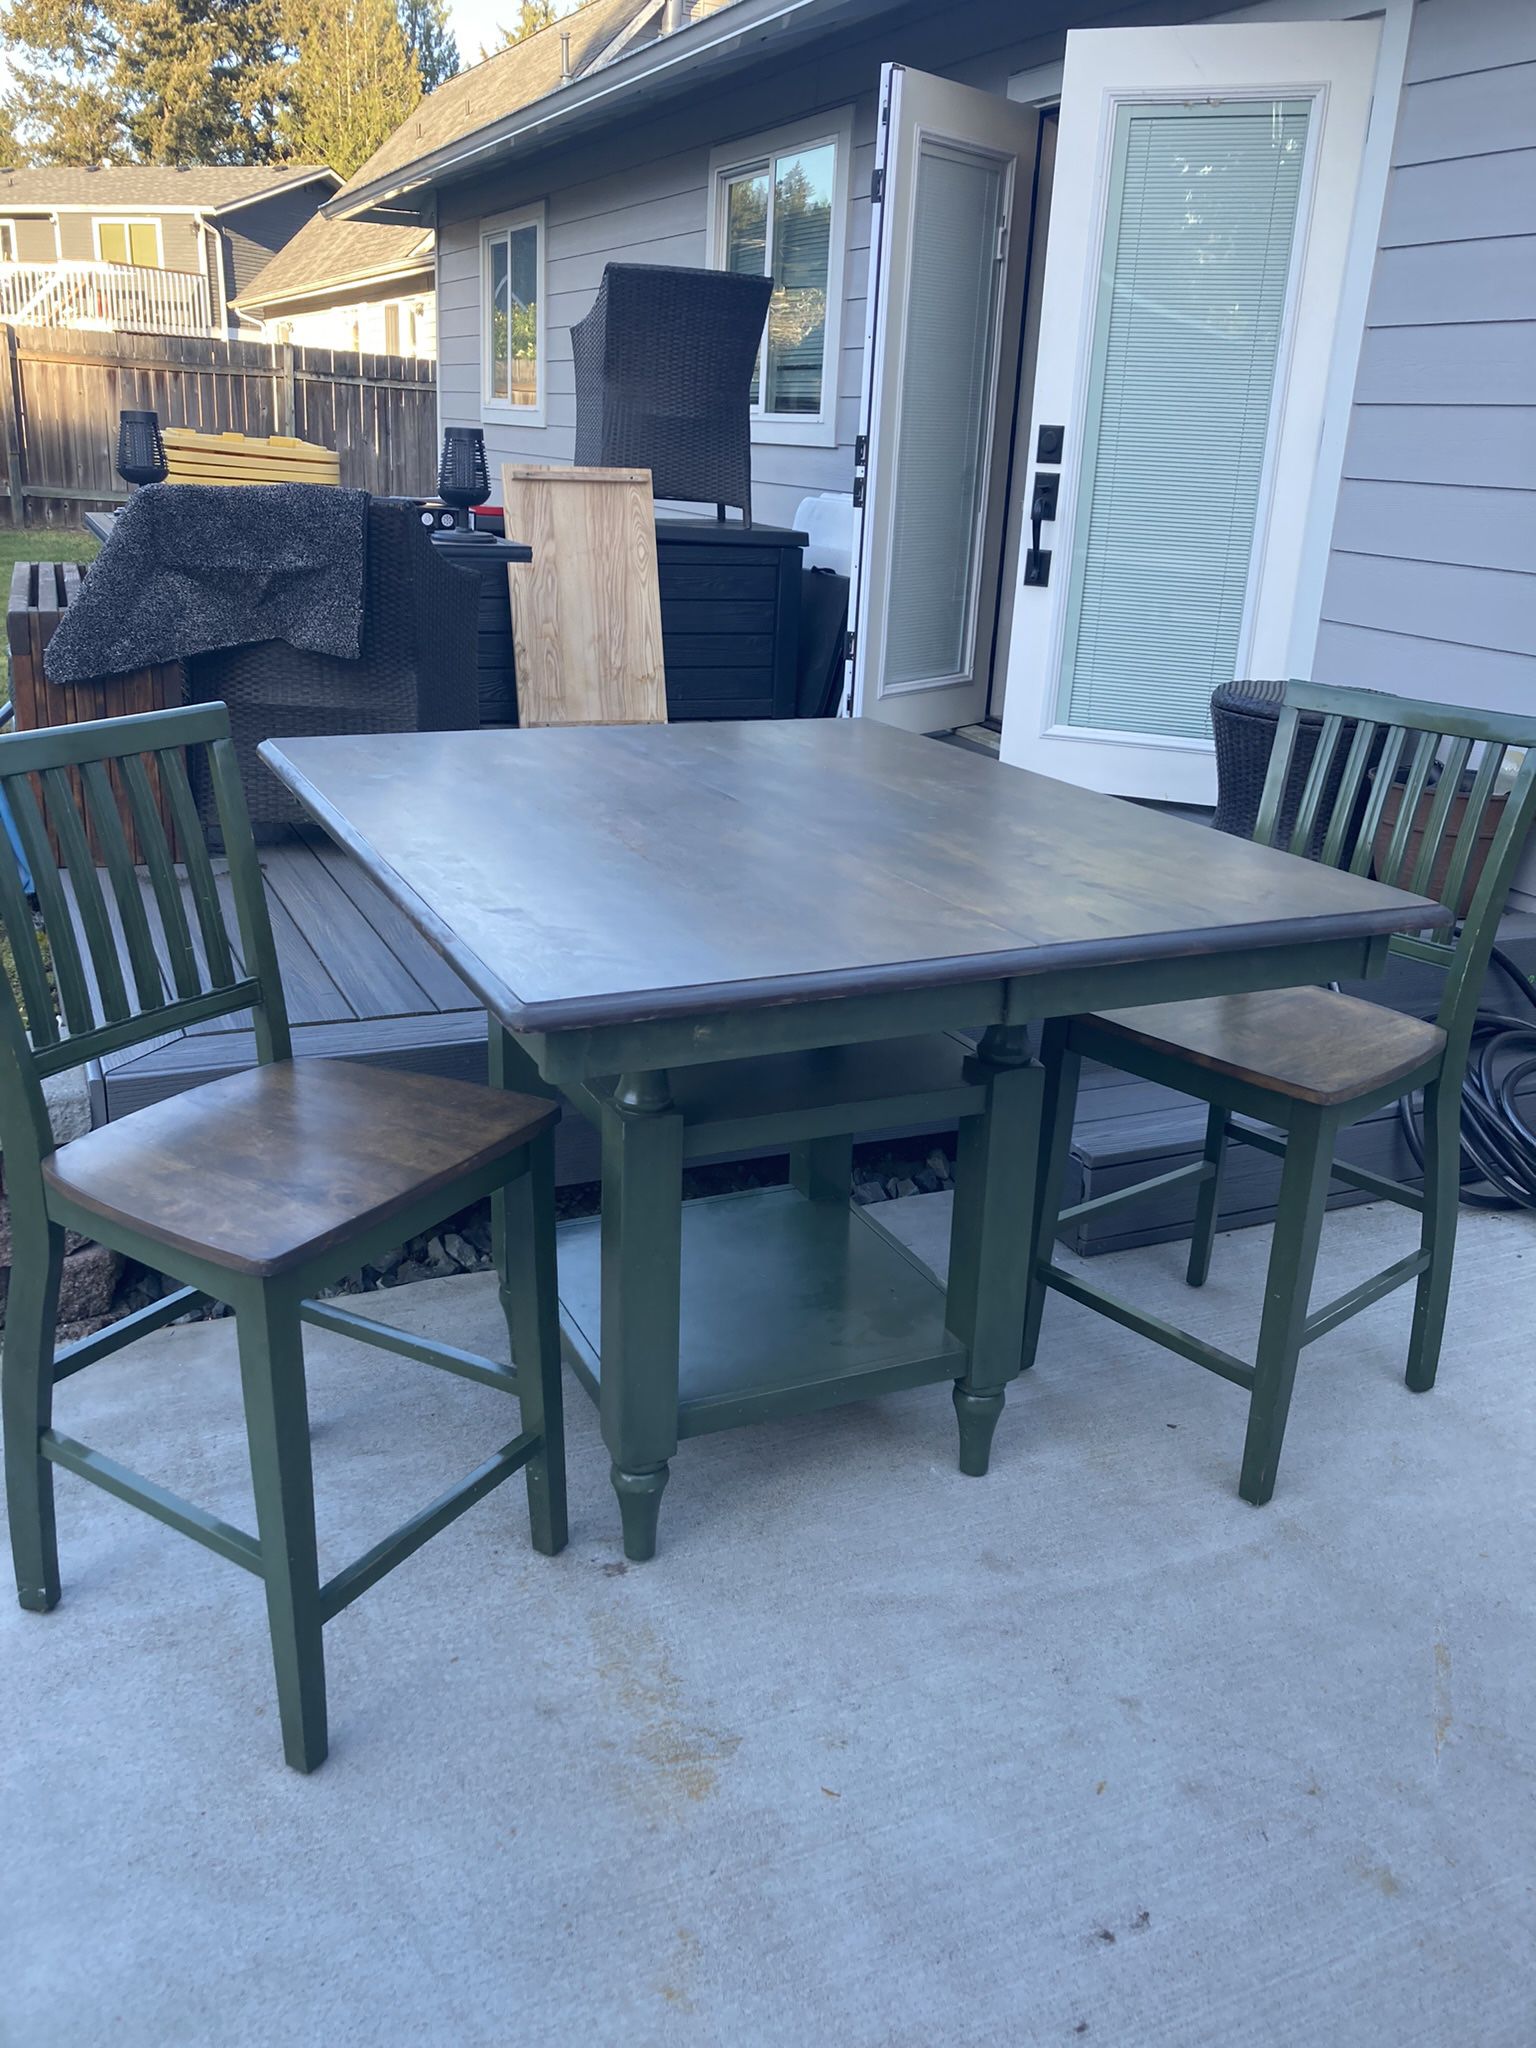 Free Counter Height Table